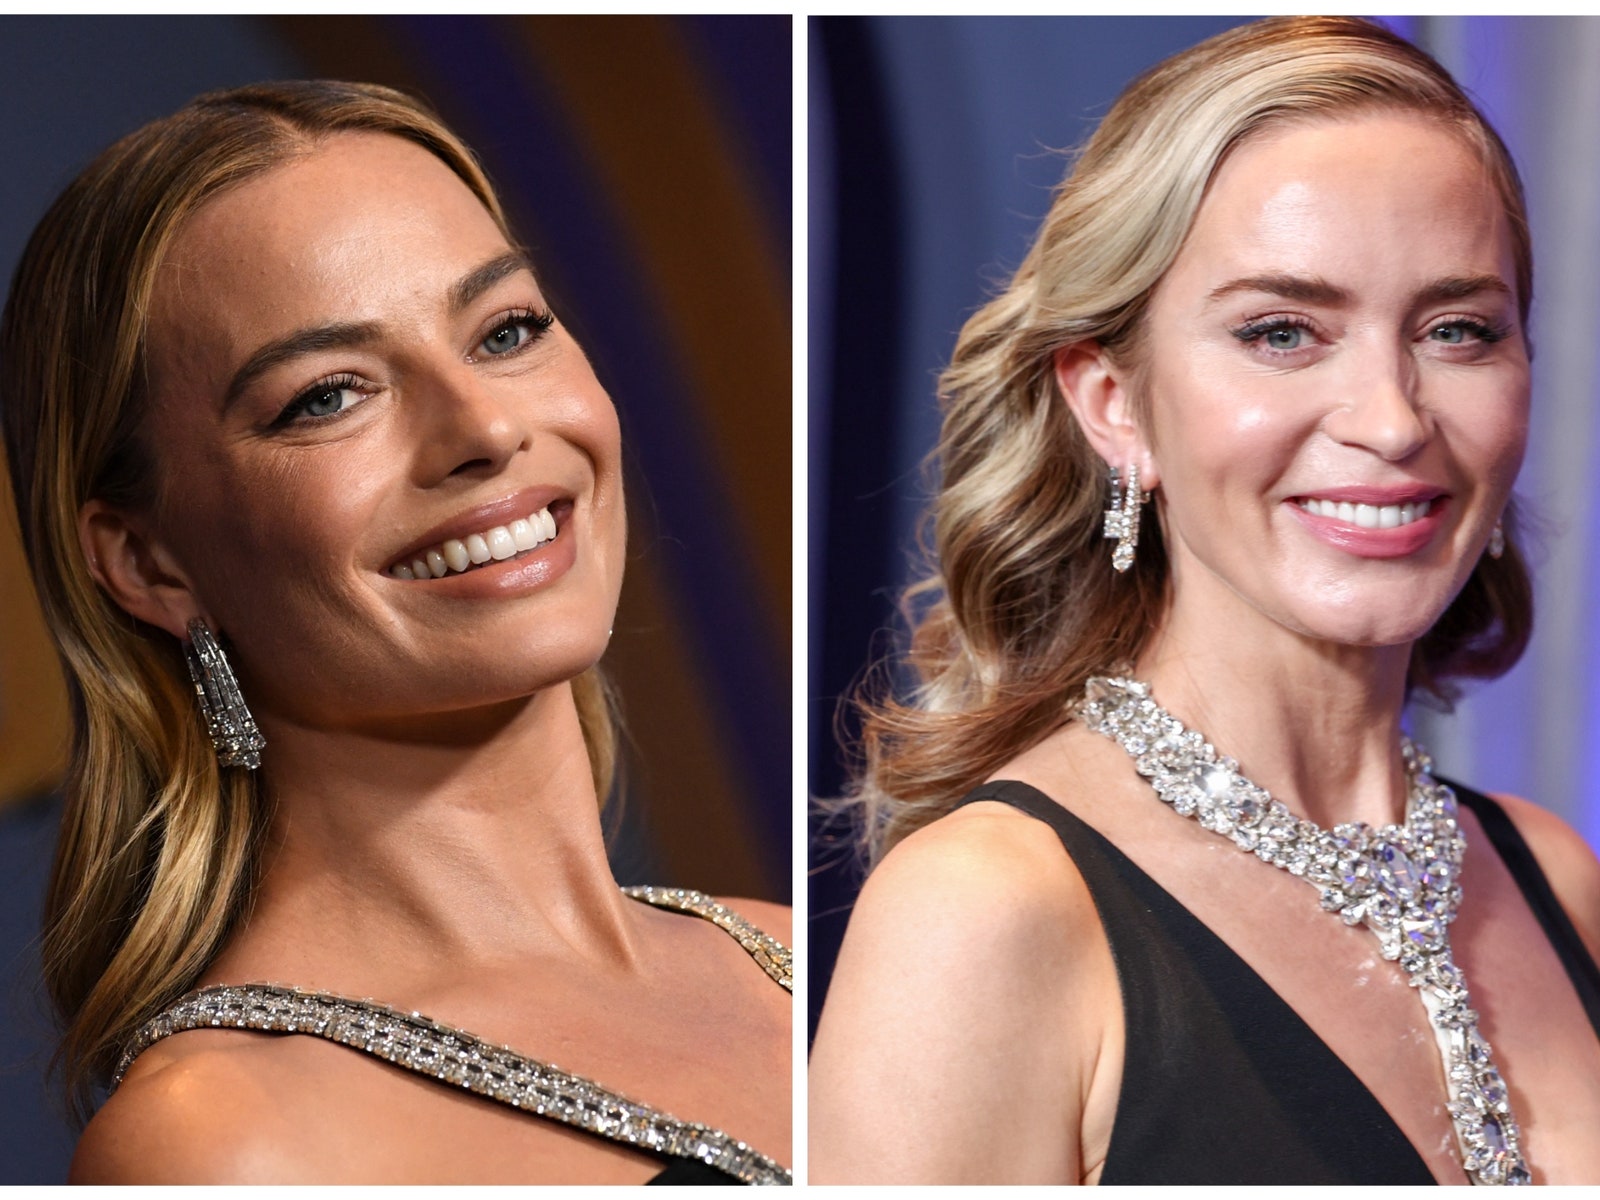 Margot Robbie and Emily Blunt Were Twinning in Embellished Black Evening Gowns